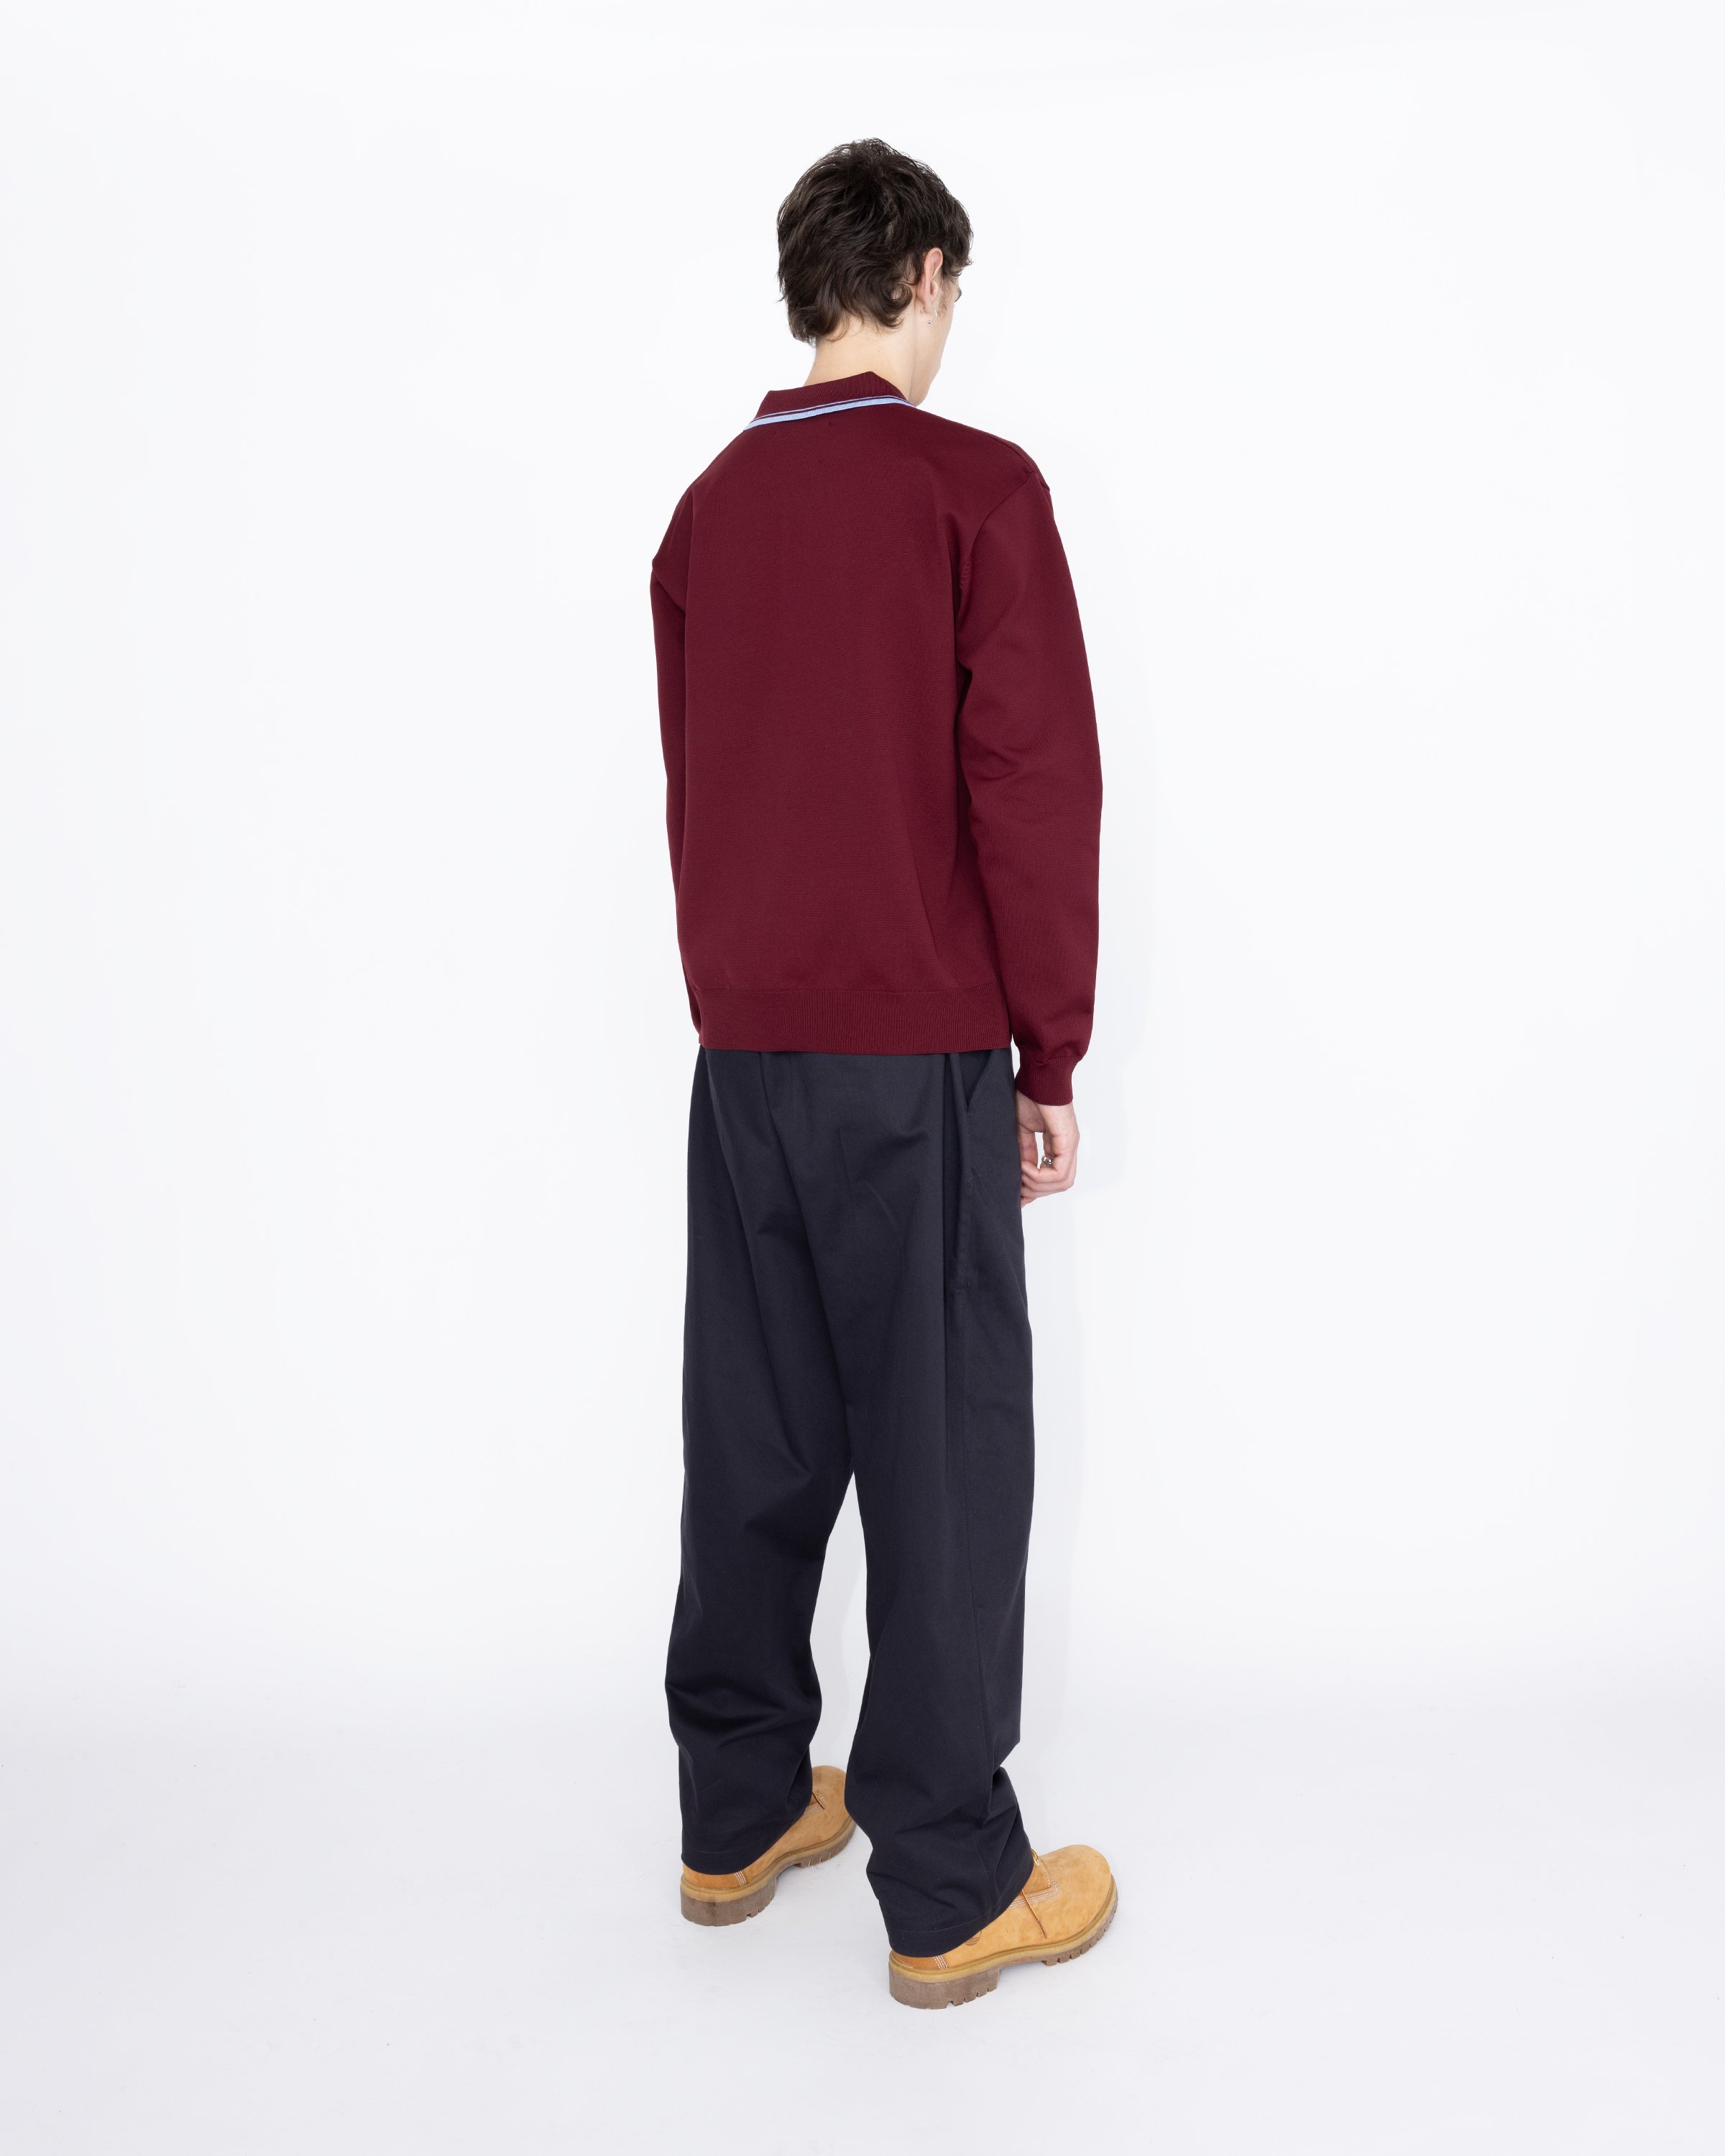 Highsnobiety HS05 - Long Sleeves Knit Polo Bordeaux - Clothing - Red - Image 5